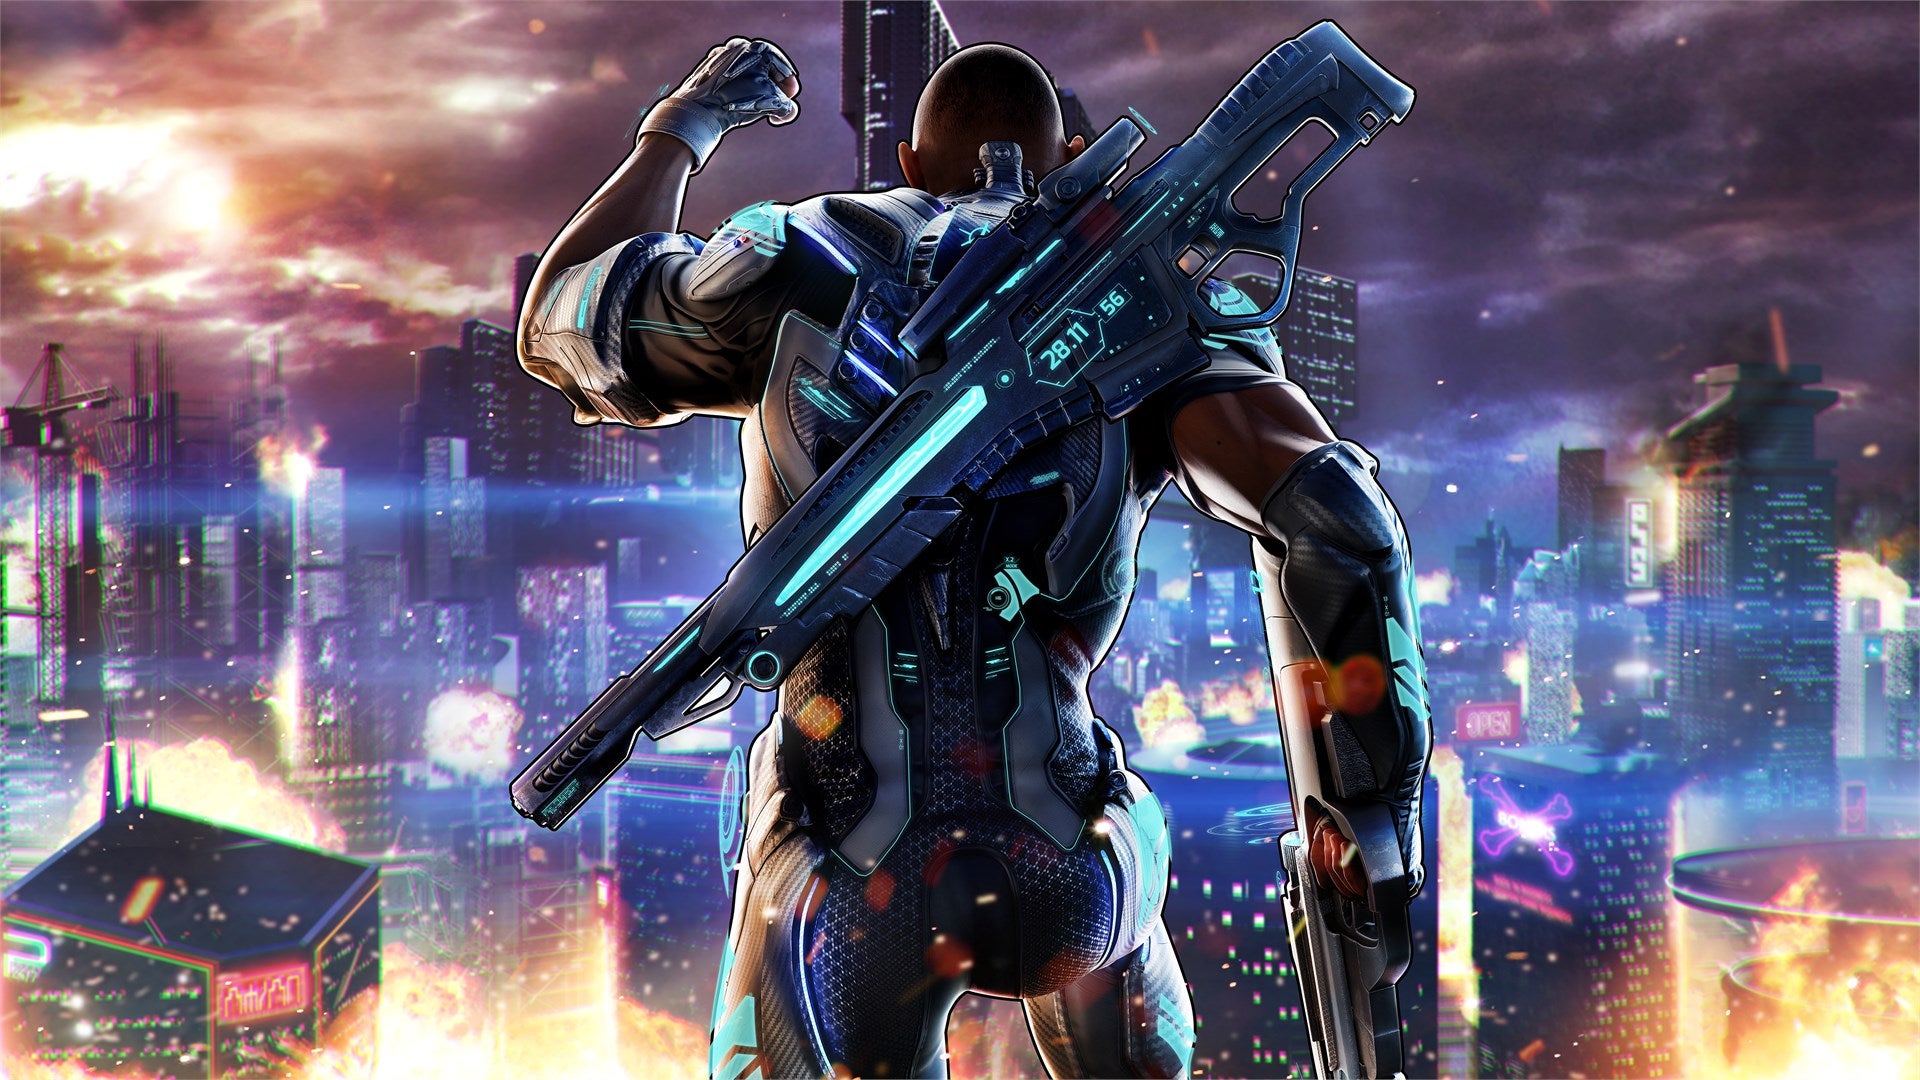 A man in a metal suit faces away from the camera pumping their fist in Crackdown 3